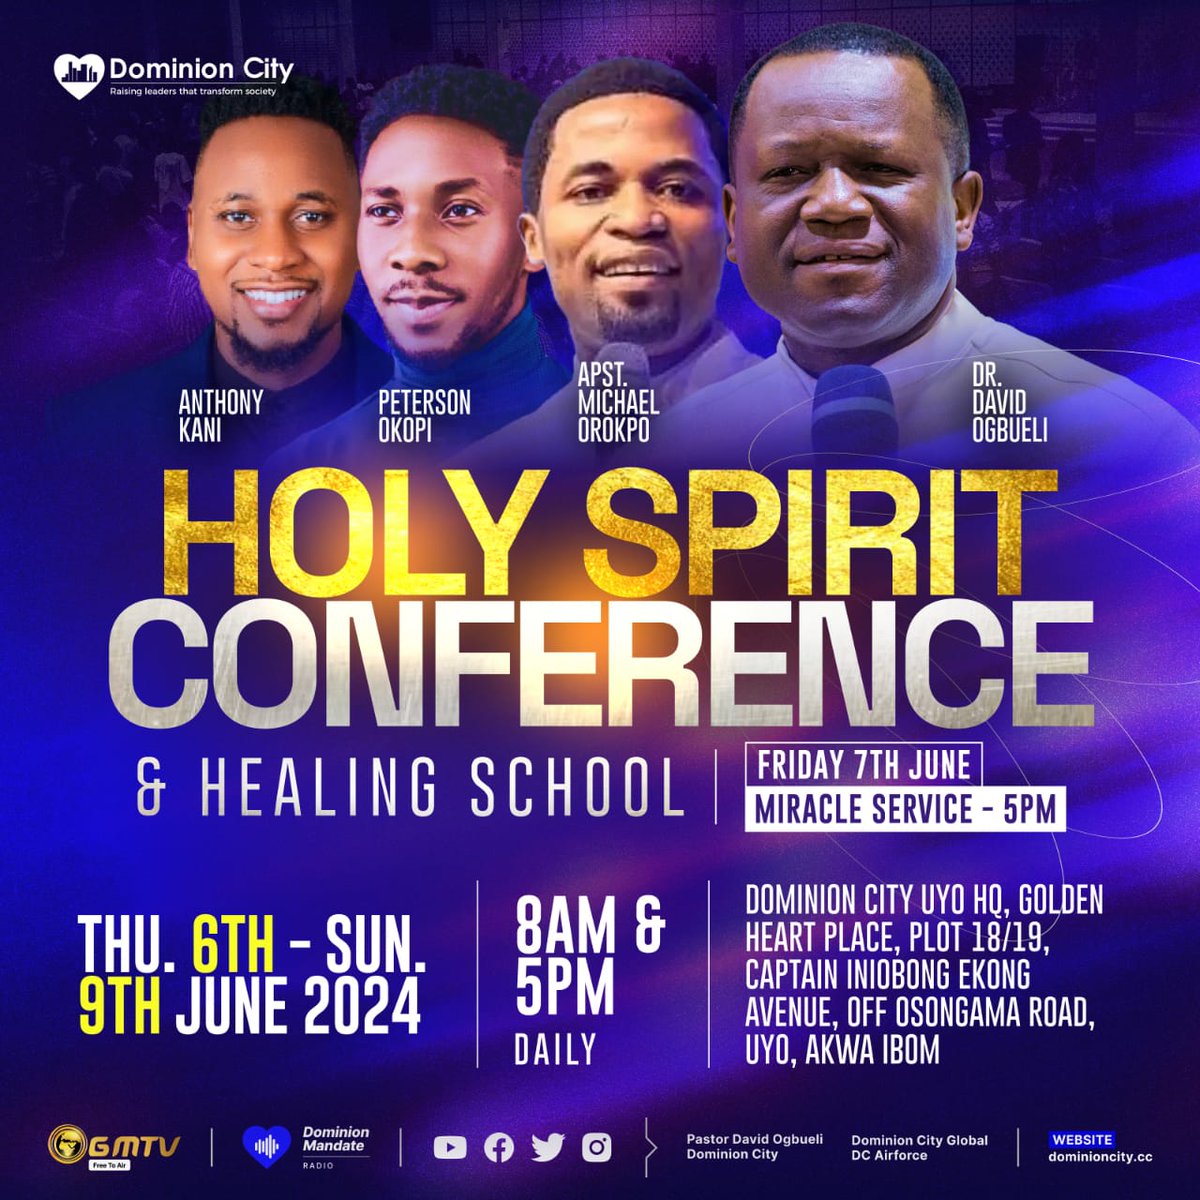 Holy Spirit Conference 2024 is loaded & packed for a never-to-forget experience with Healing School & Miracle Service.

Invite everyone you know as we anticipate a mighty demonstration of the outpouring & power of the Holy Spirit. 

#holyspiritconference #dominioncity